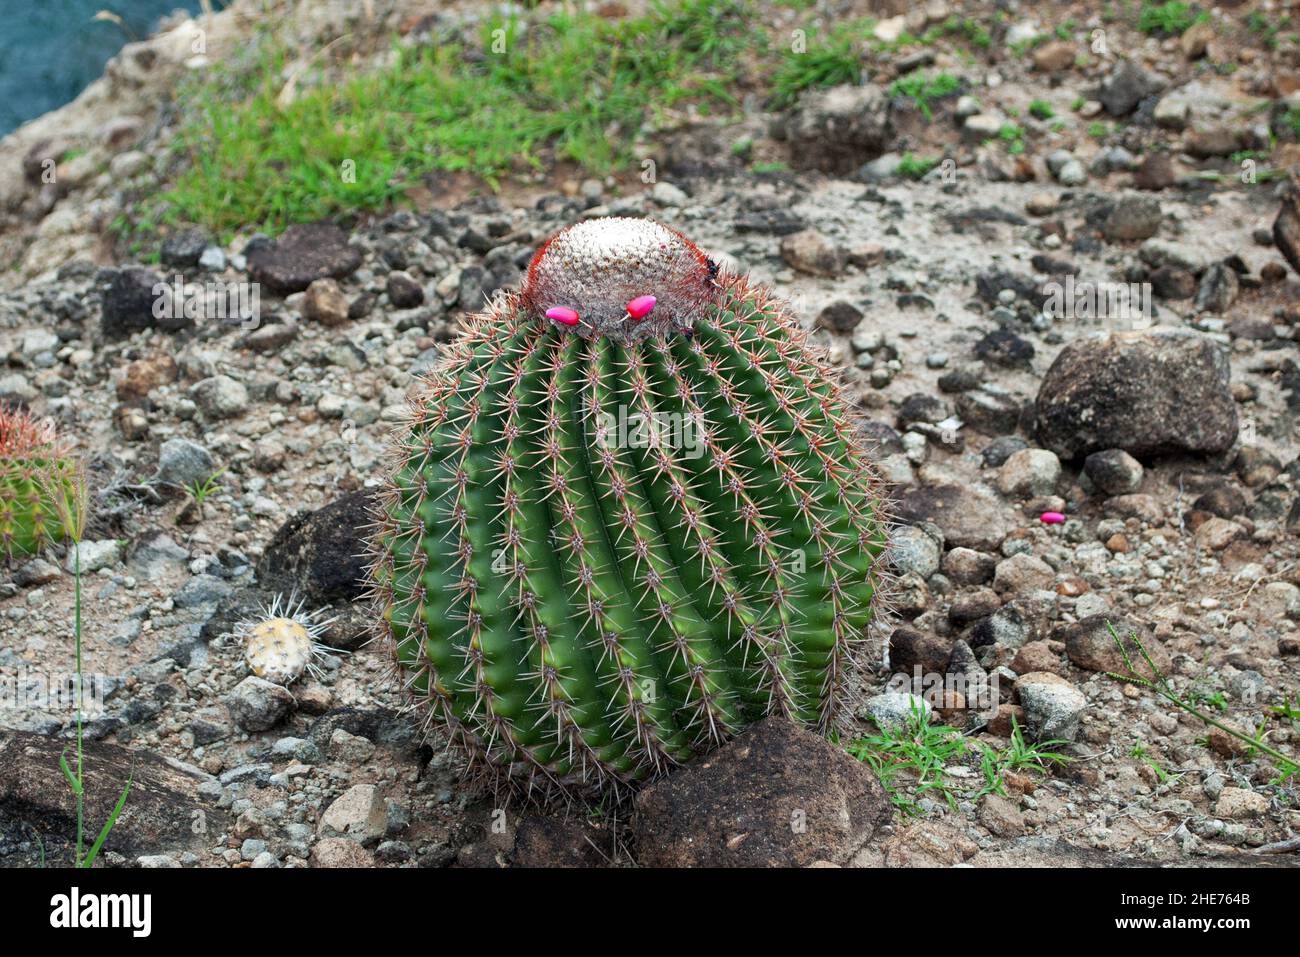 Melocactus intortus is a common Caribbean species of cactus. The pictures were taken on St Lucia. Stock Photo